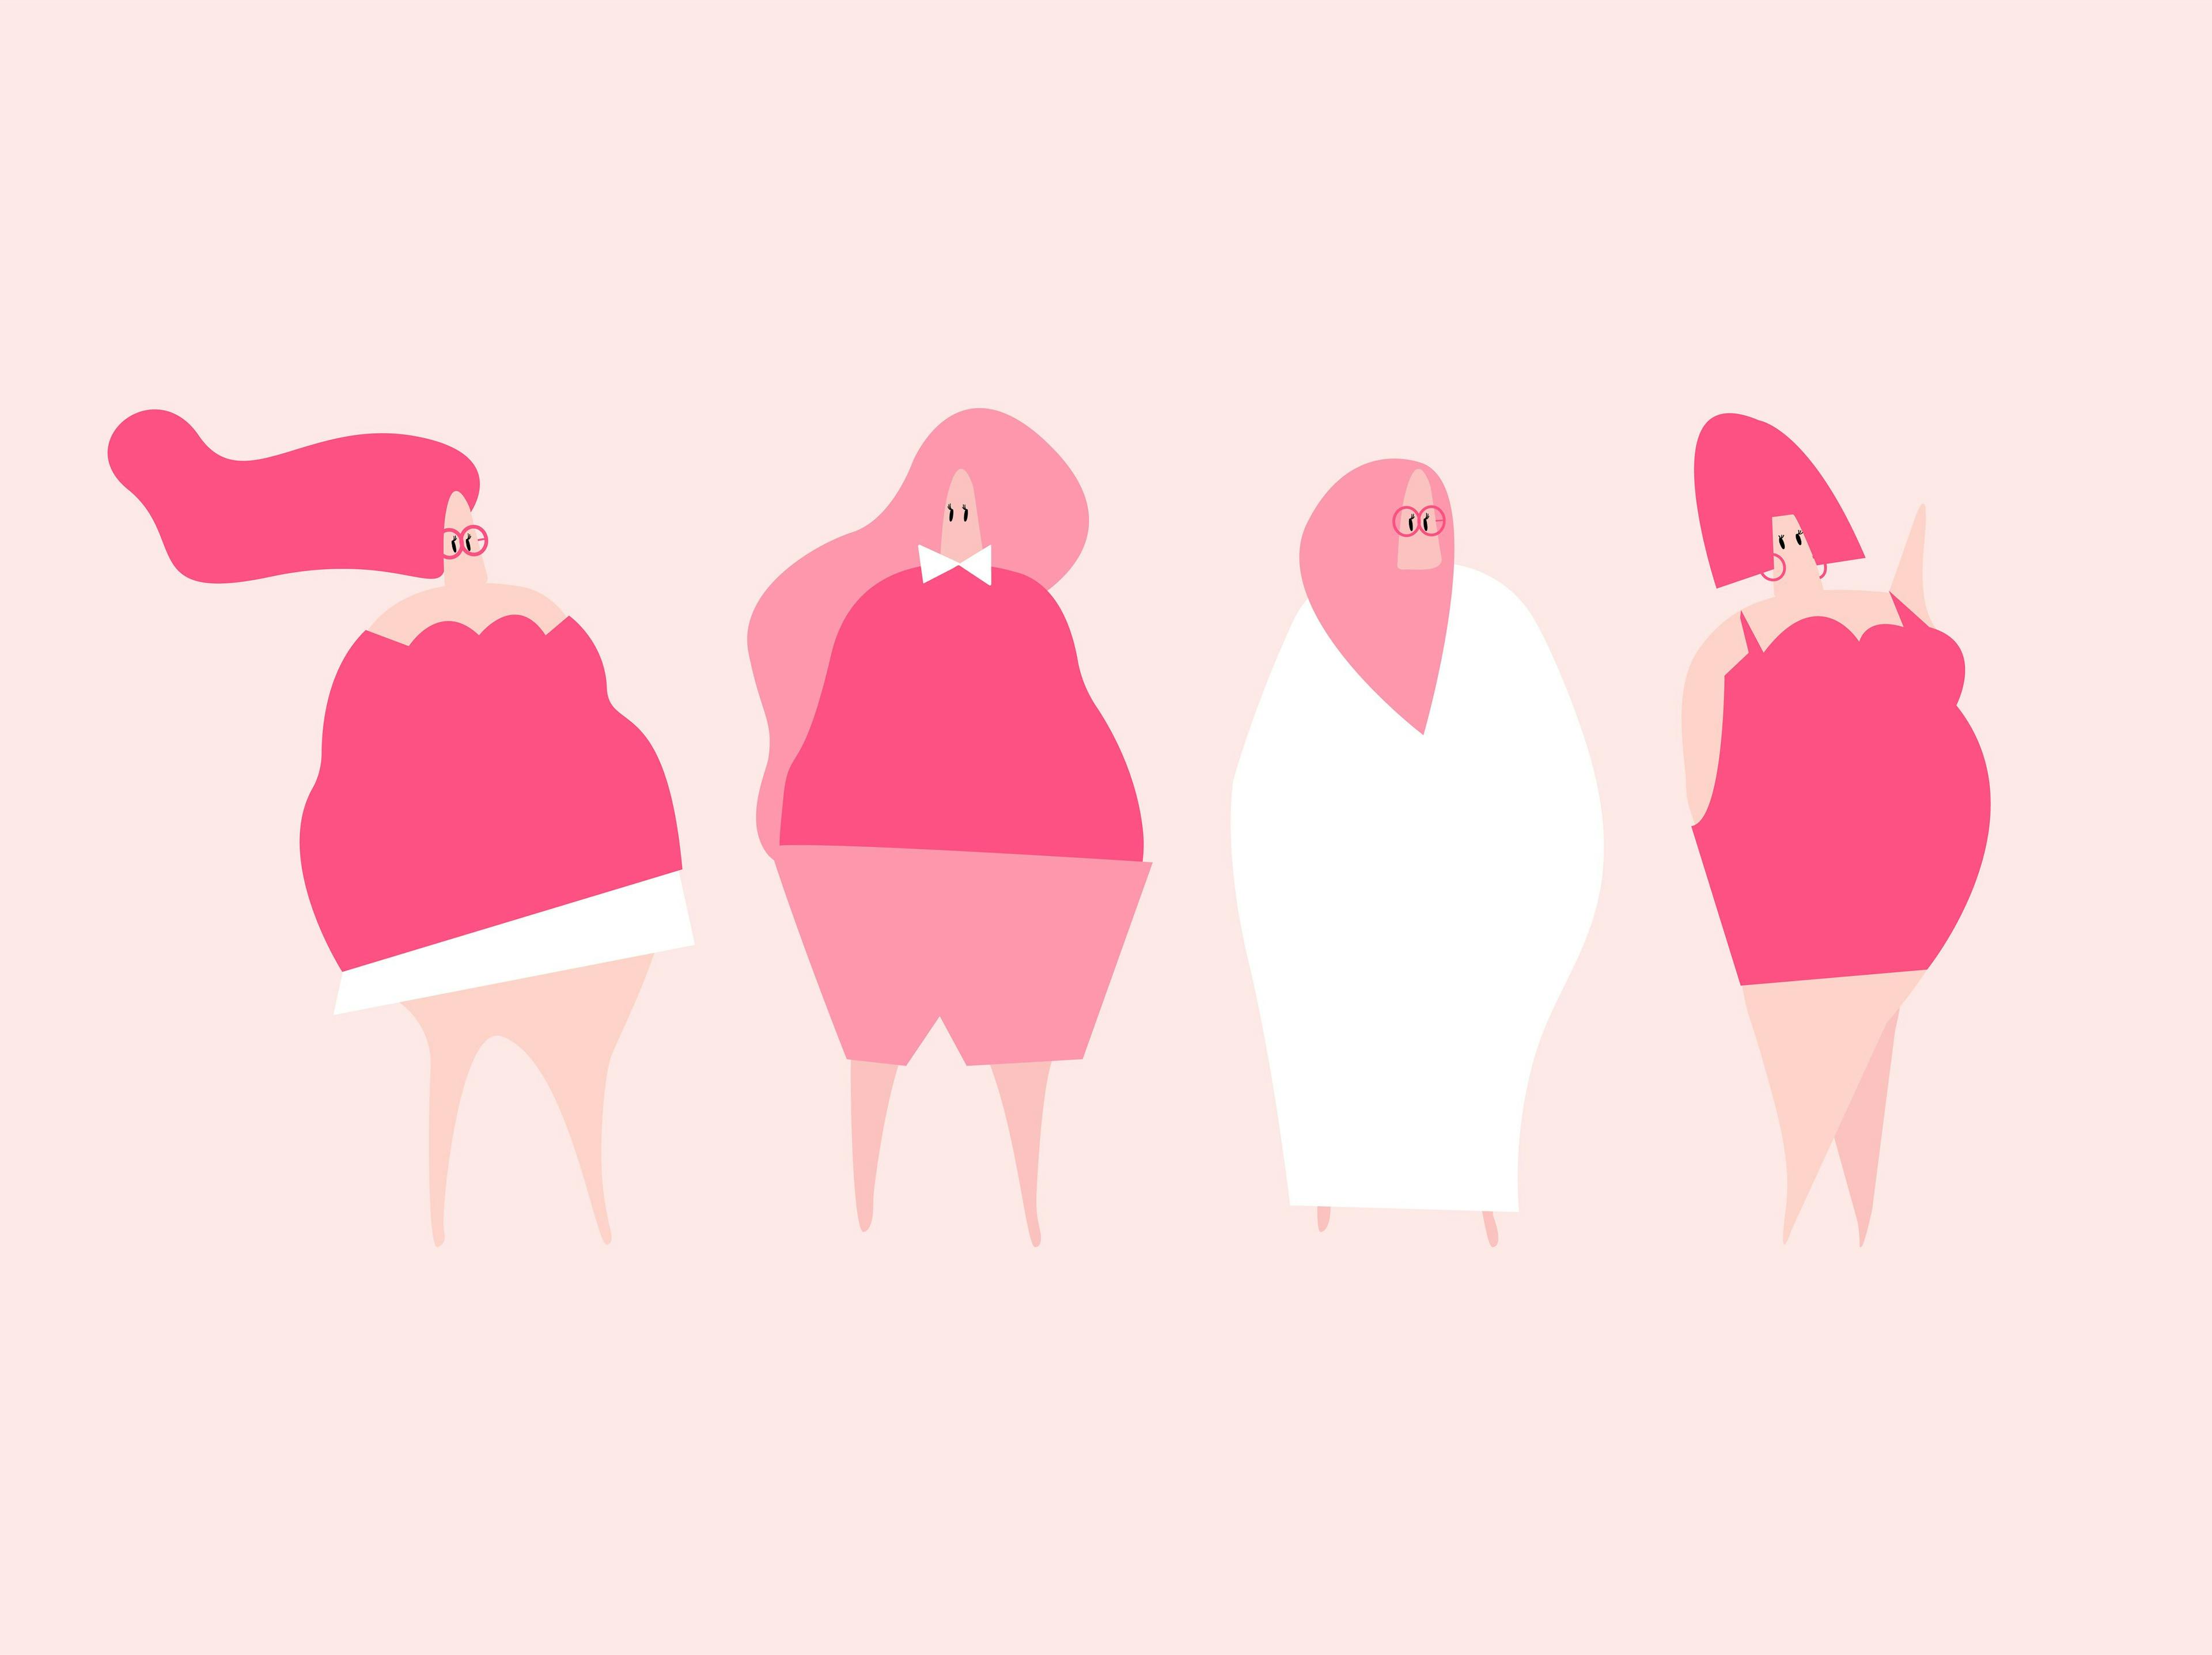 Illustration of diverse women with breast cancer, obesity | Image Credit: Rawpixel.com - stock.adobe.com